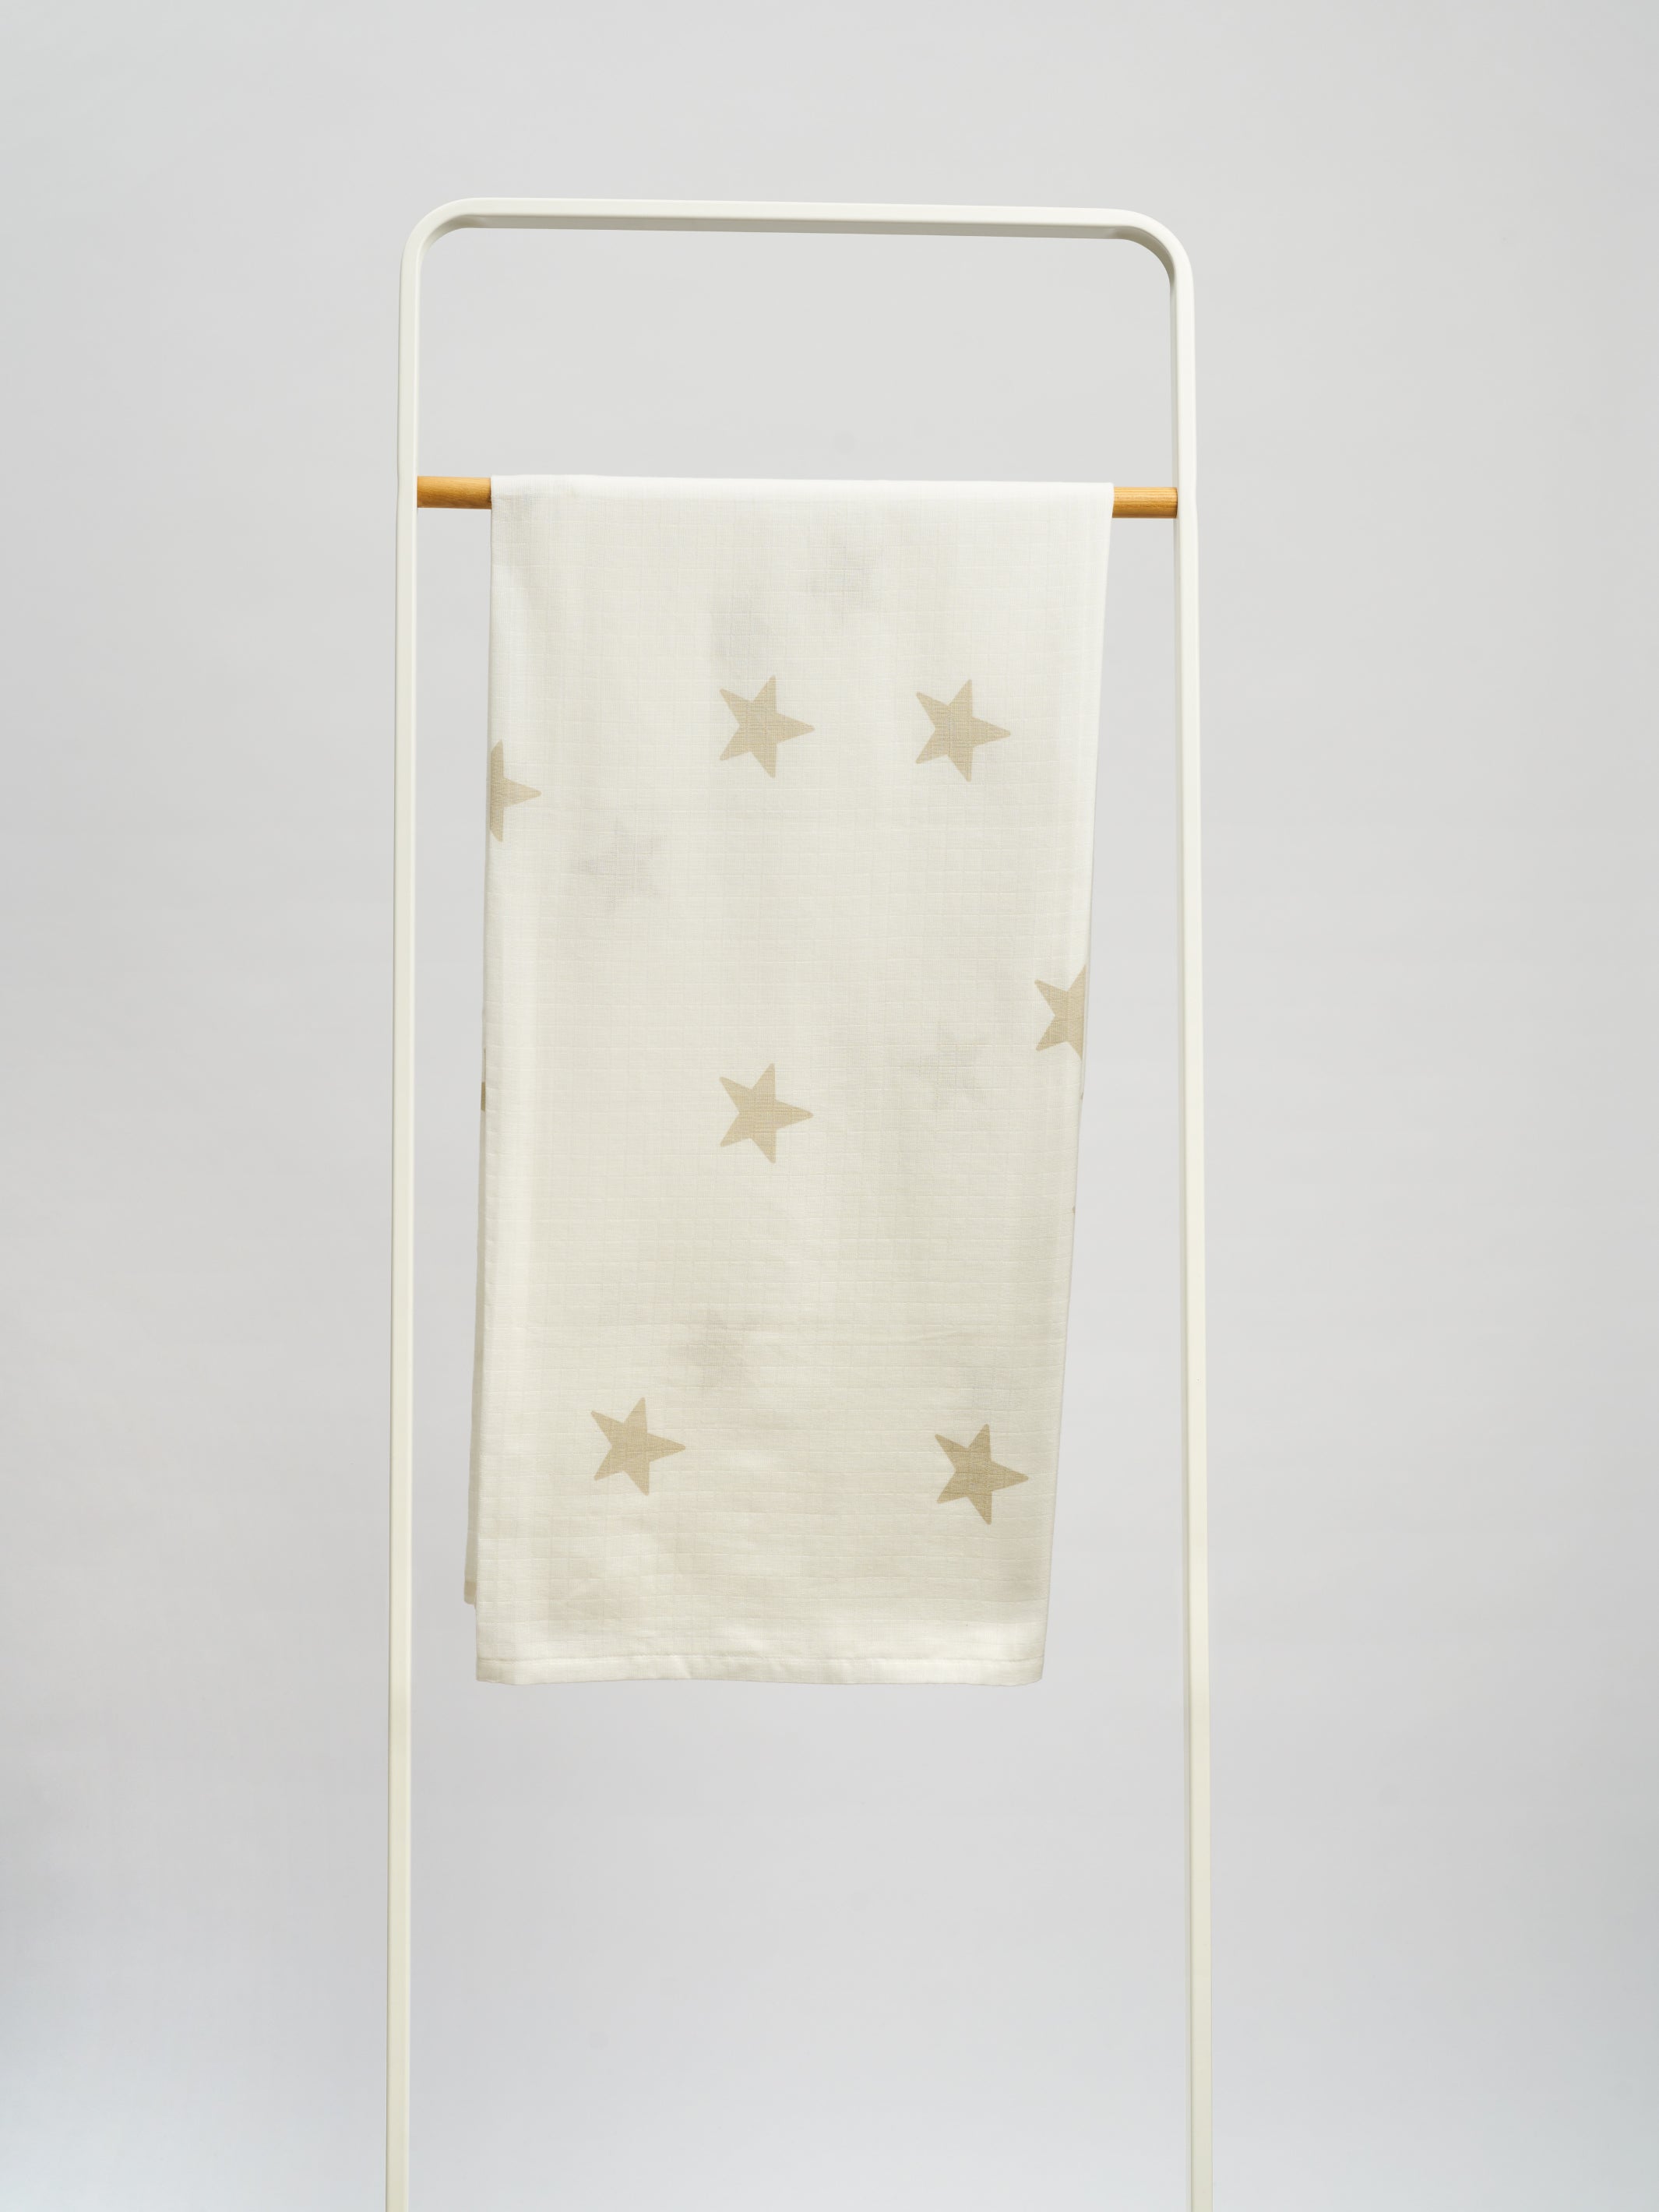 Organic and Fairtrade Cotton Muslin Swaddle